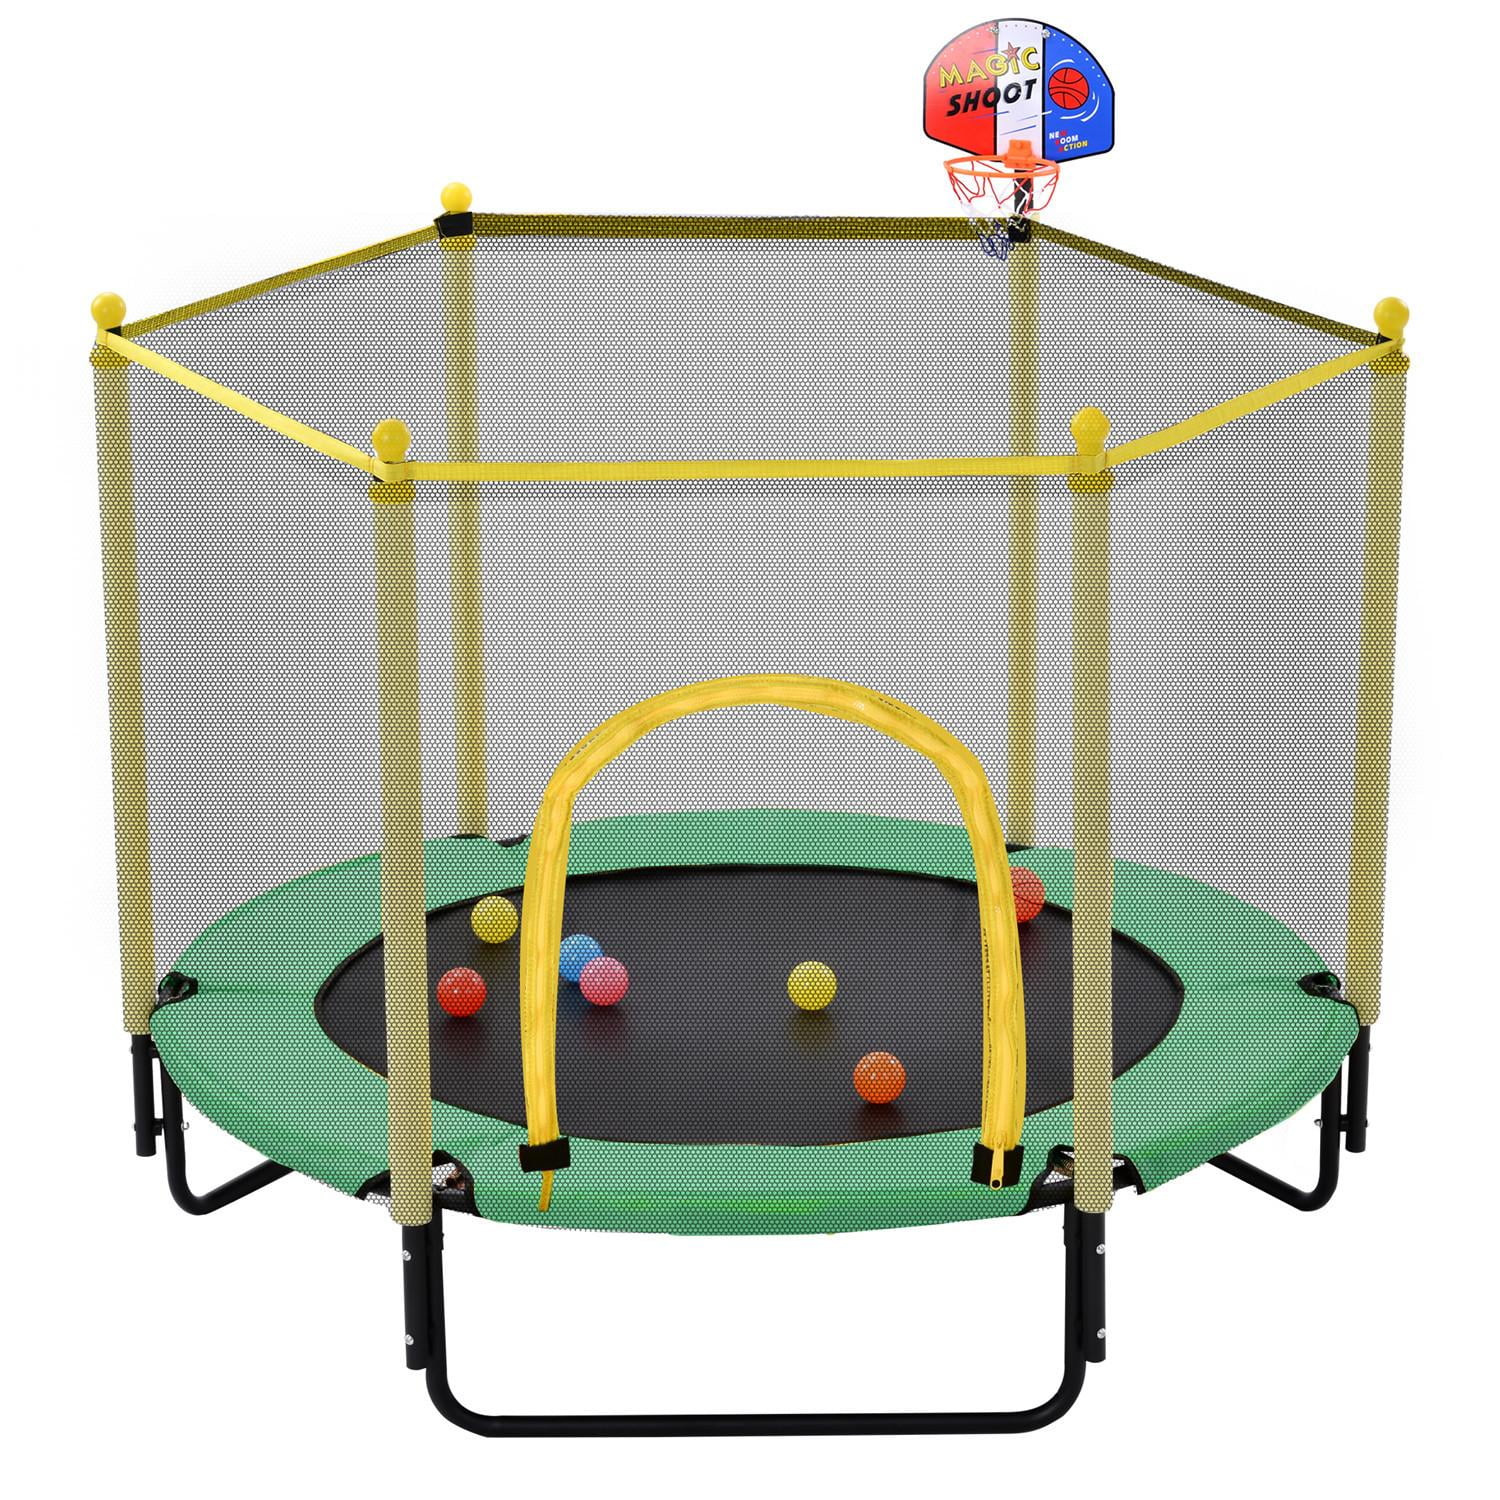 5FT Kids Trampoline with Safety Enclosure Net, Toddlers Outdoor Indoor Mini Recreational Trampoline with Basketball Hoop, Green Yellow